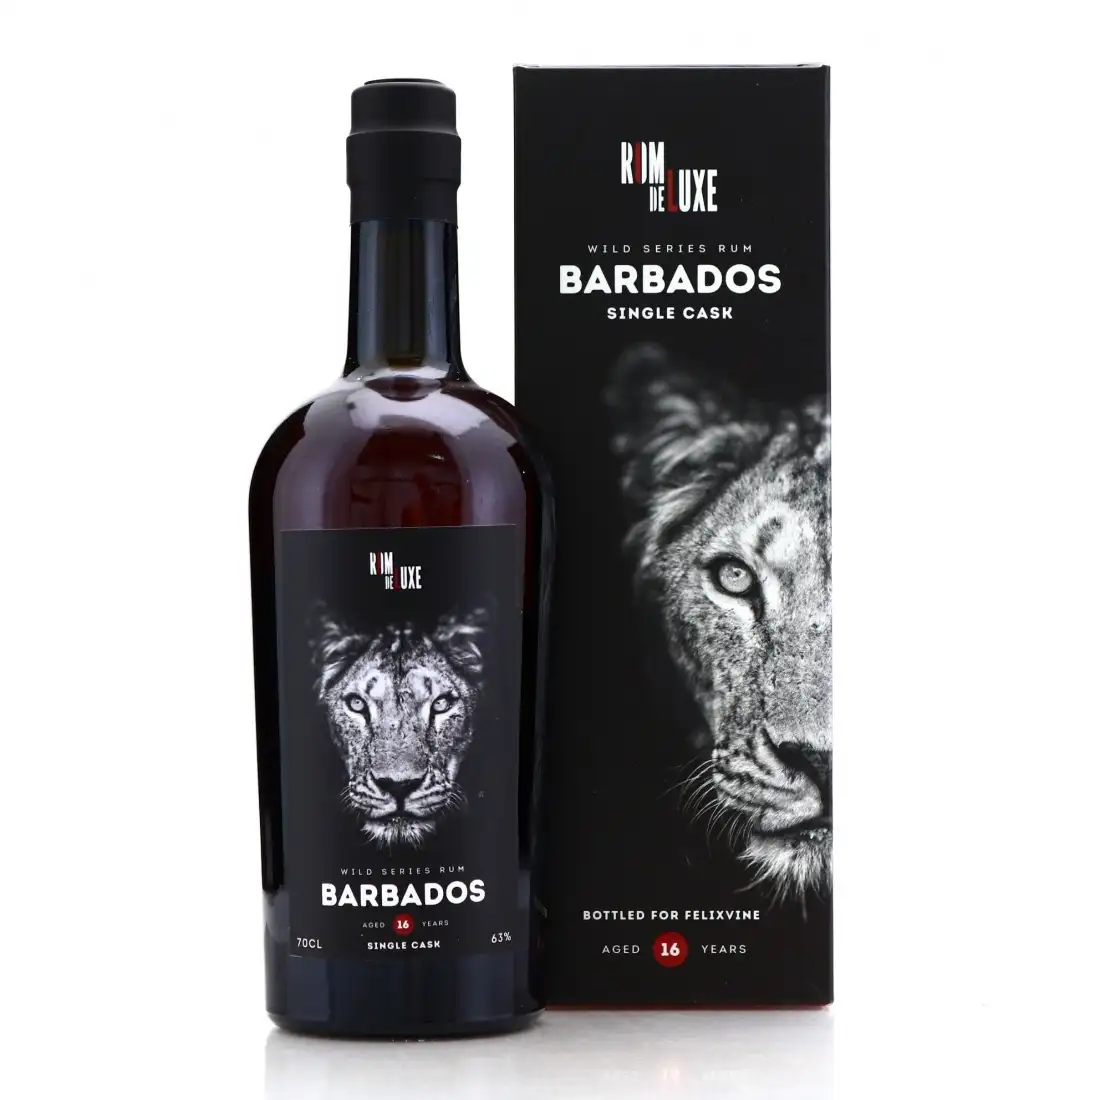 Image of the front of the bottle of the rum Wild Series Rum Barbados No. 13